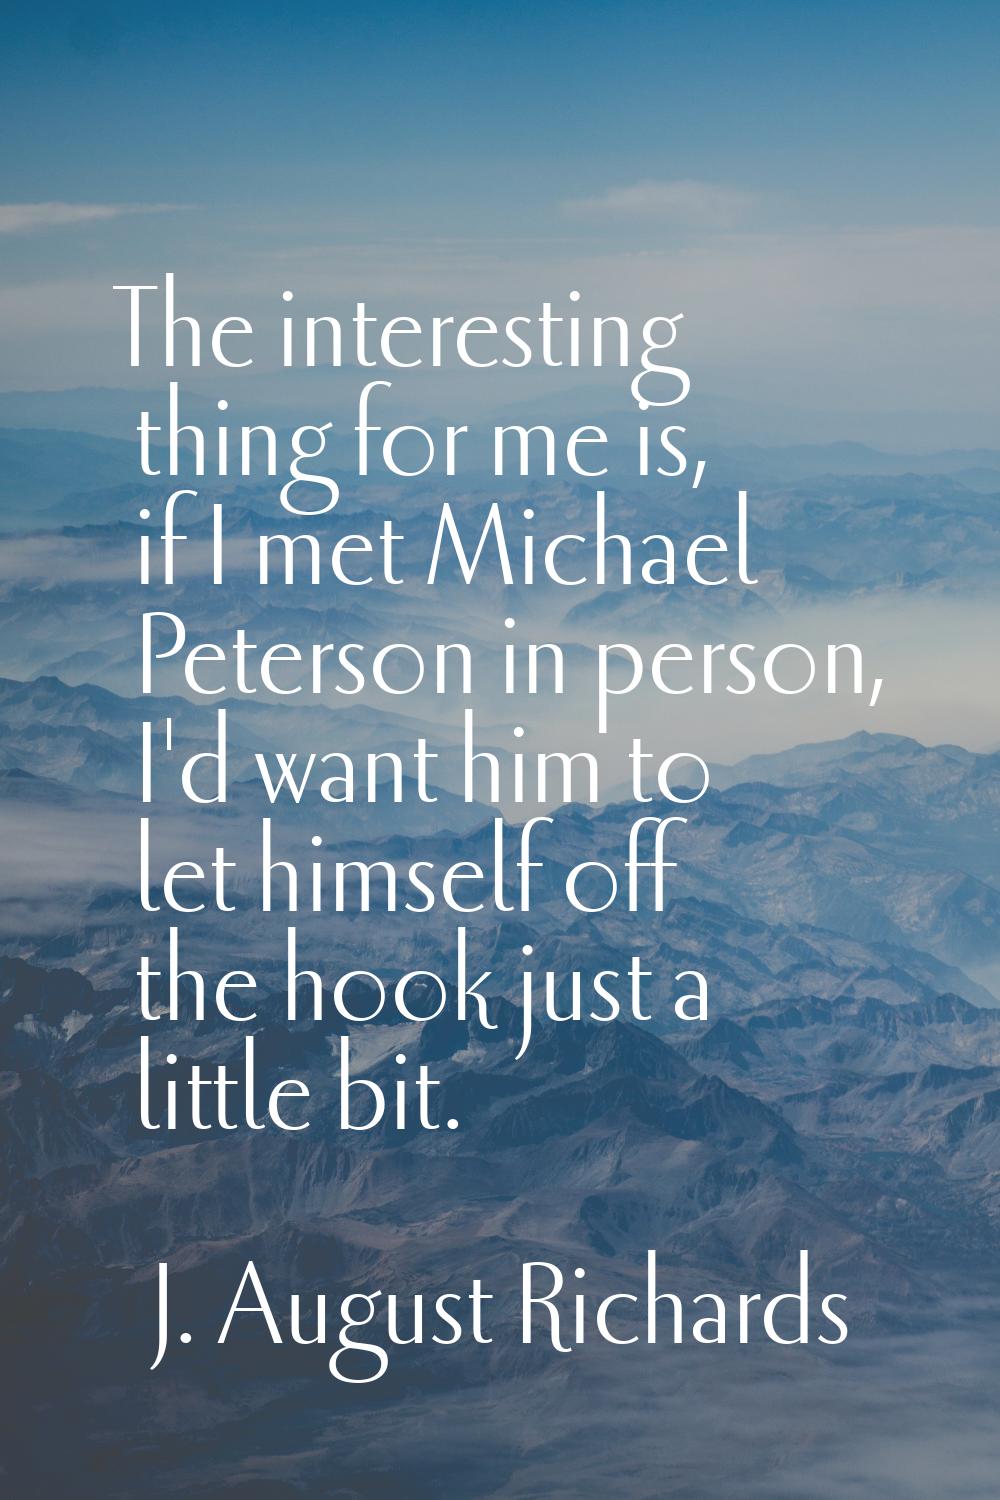 The interesting thing for me is, if I met Michael Peterson in person, I'd want him to let himself o